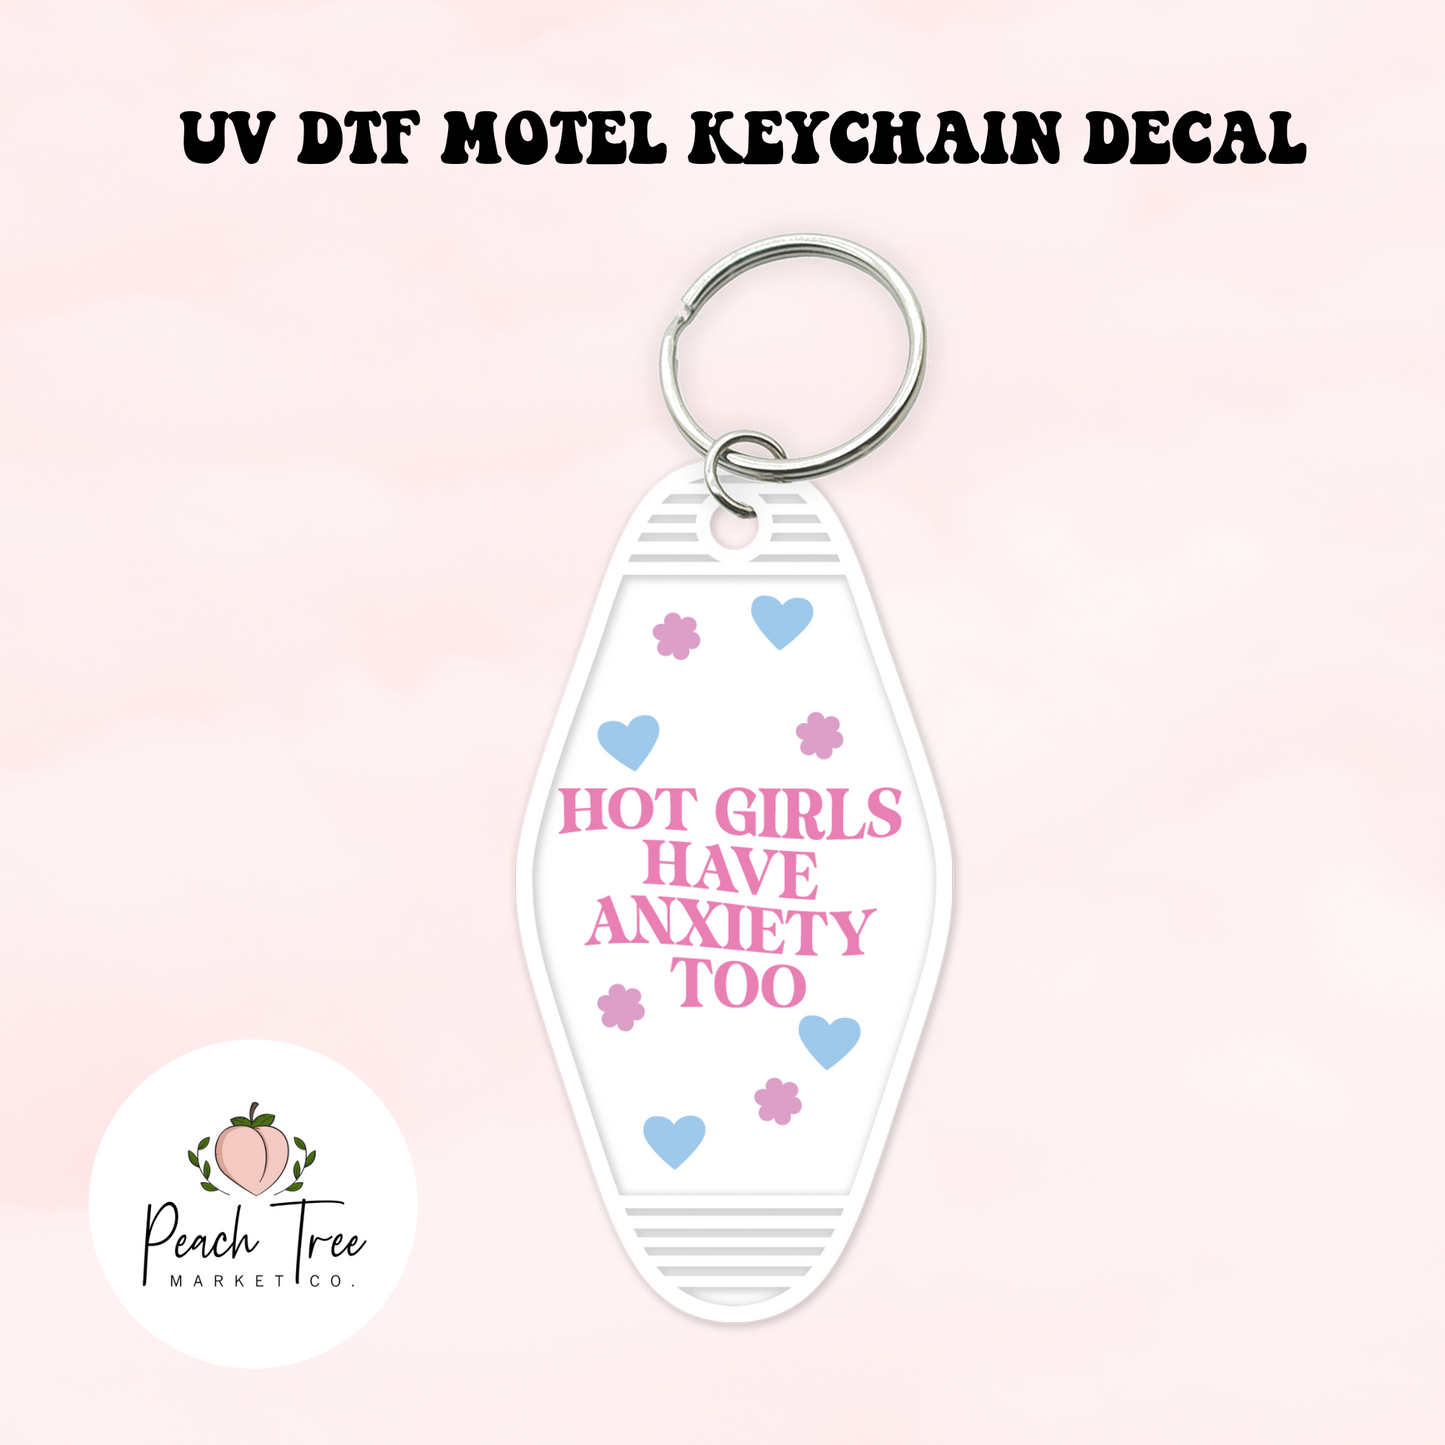 Hot Girls Have Anxiety Too UV DTF Motel Keychain Decal